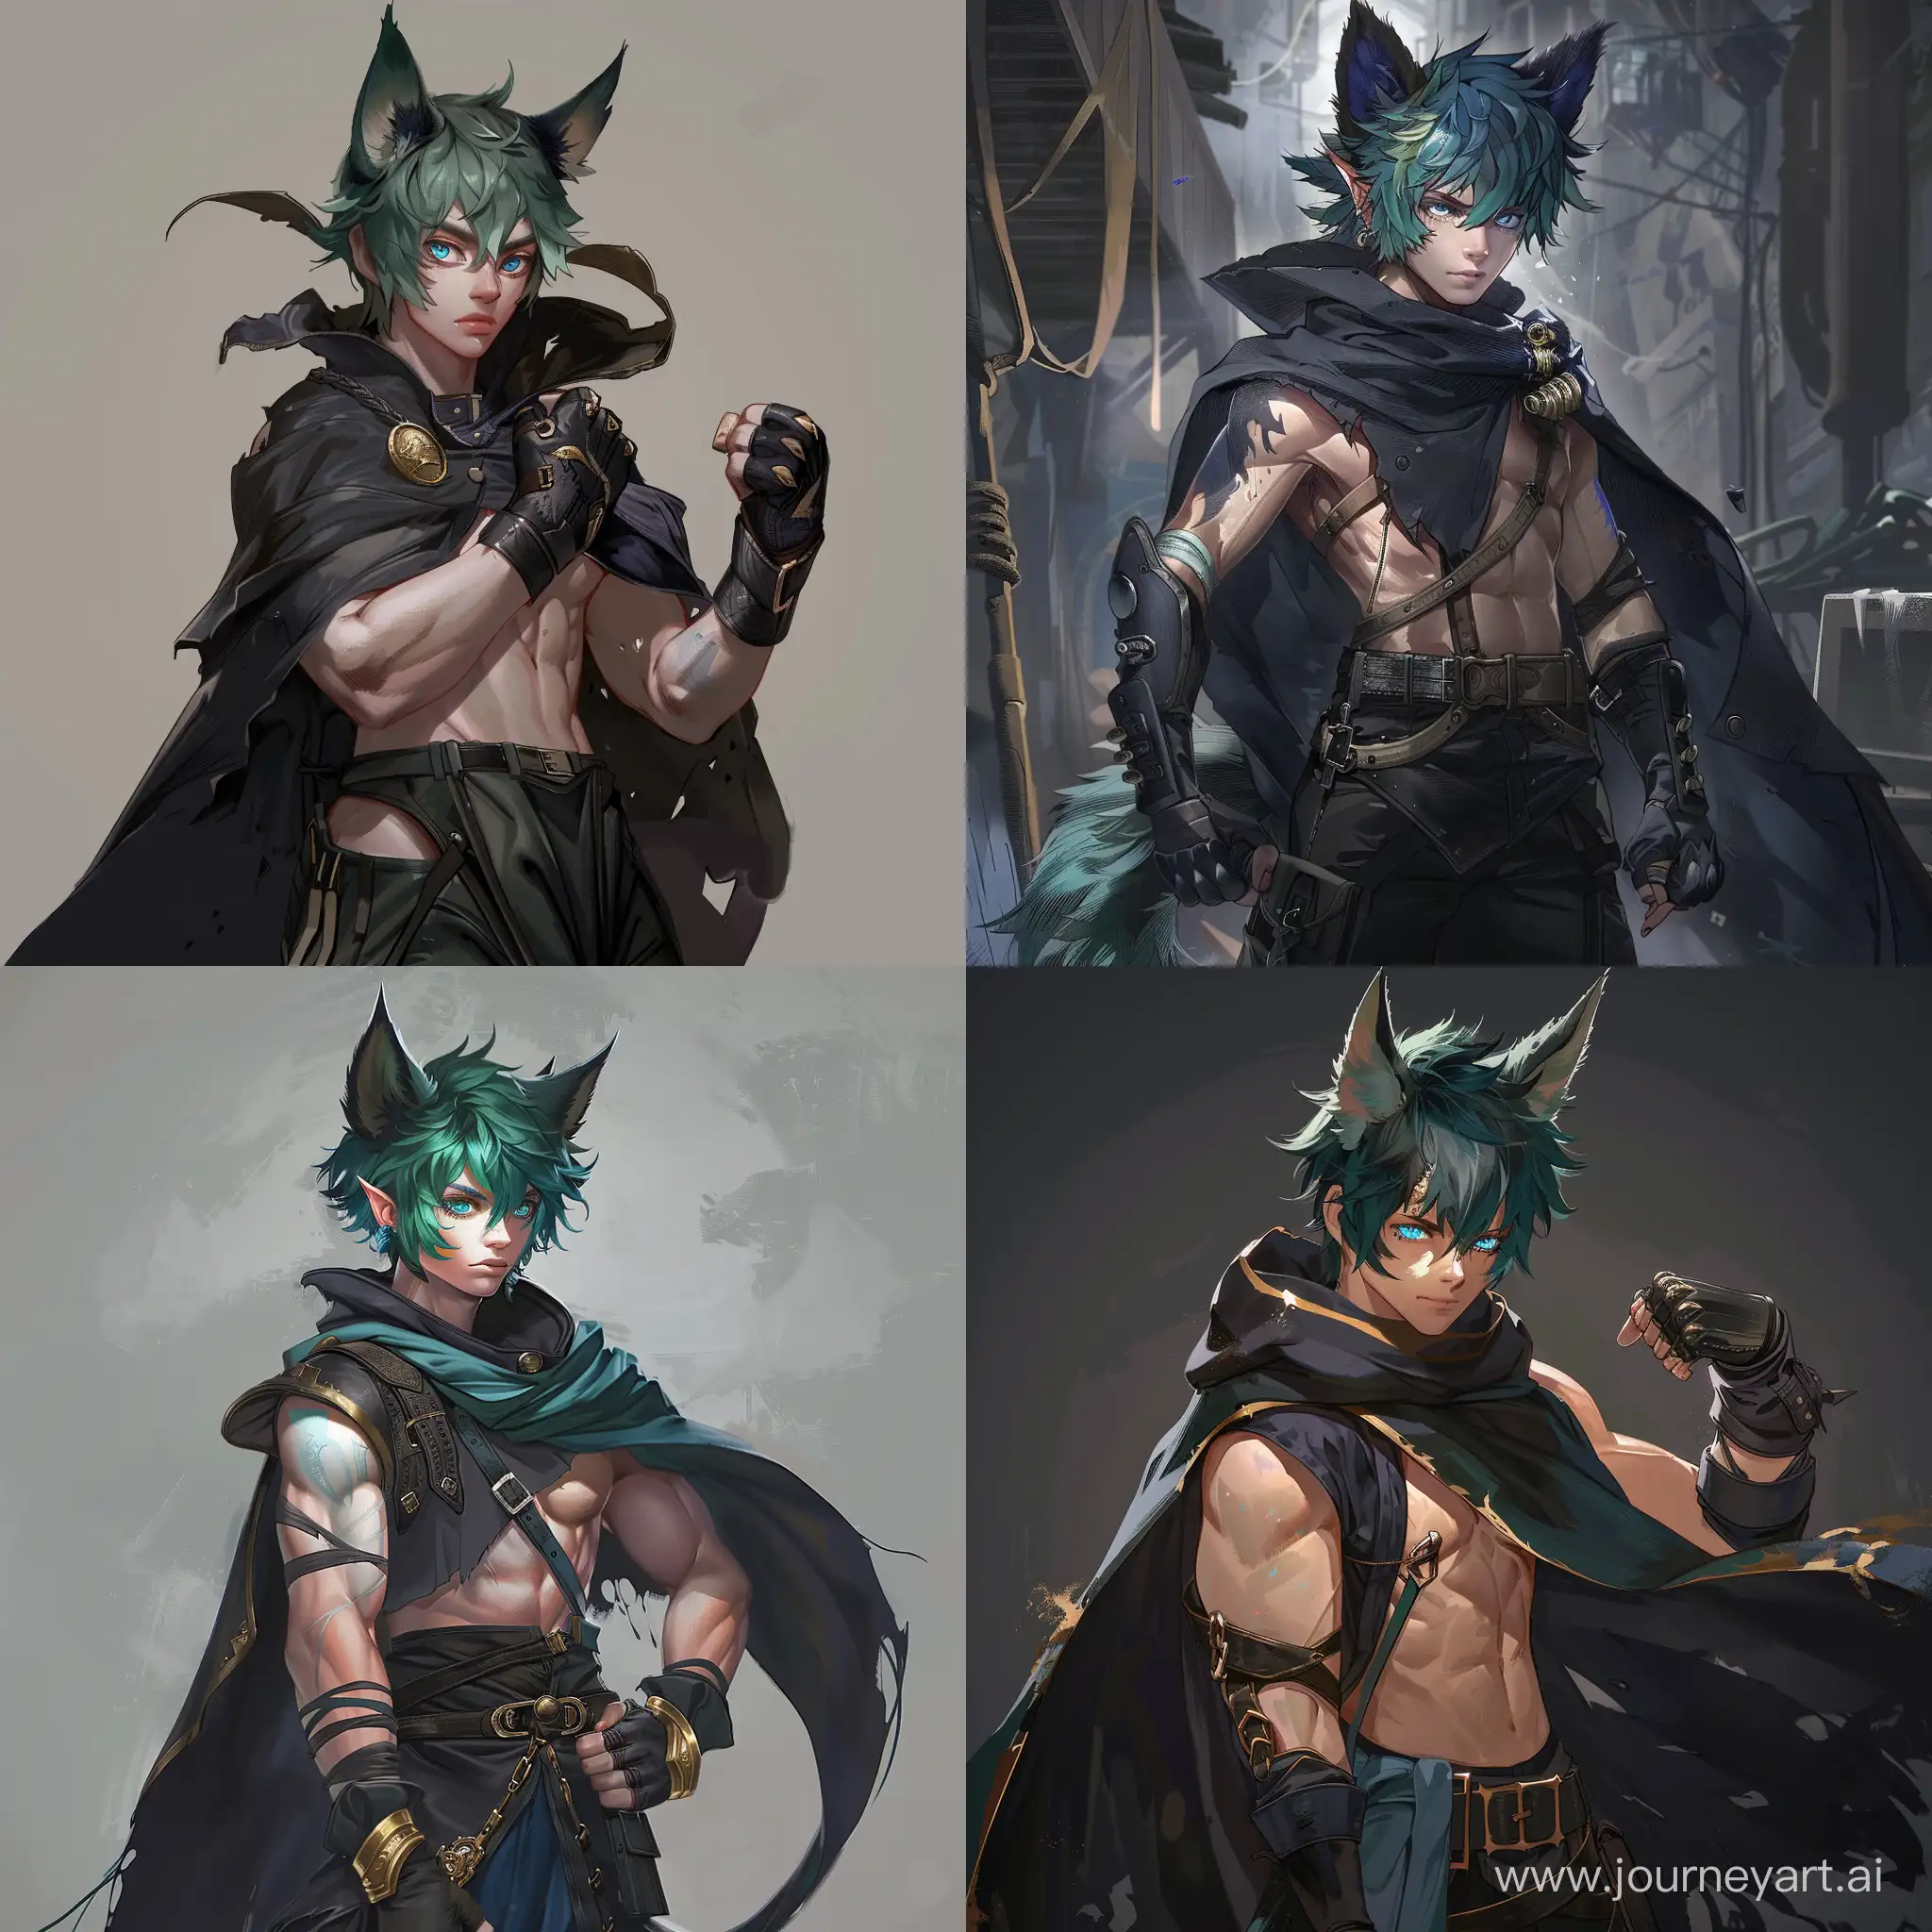 A pumped-up, handsome and pale young half-man with the ears and tail of a black wolf. Green hair, bright blue blue eyes and beautiful fighting clothes. He uses combat gloves as a weapon. He wears a black cloak on top to hide his military clothes.